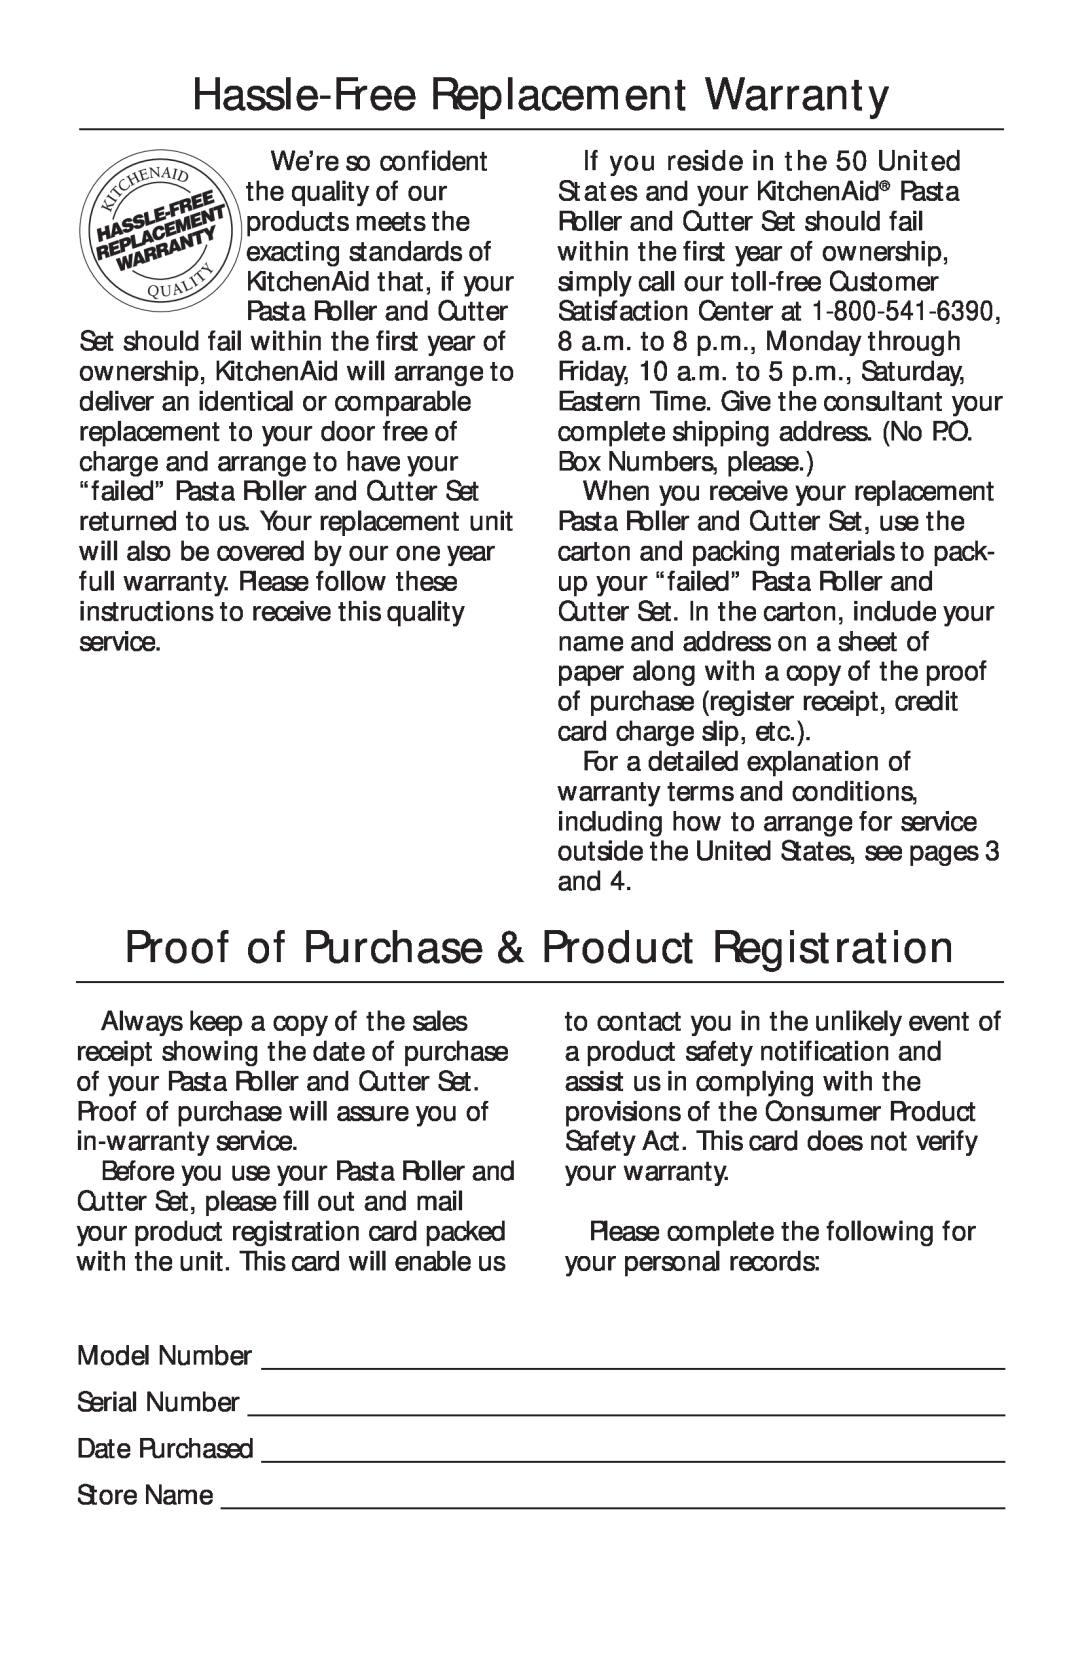 KitchenAid KPRA manual Hassle-Free Replacement Warranty, Proof of Purchase & Product Registration 